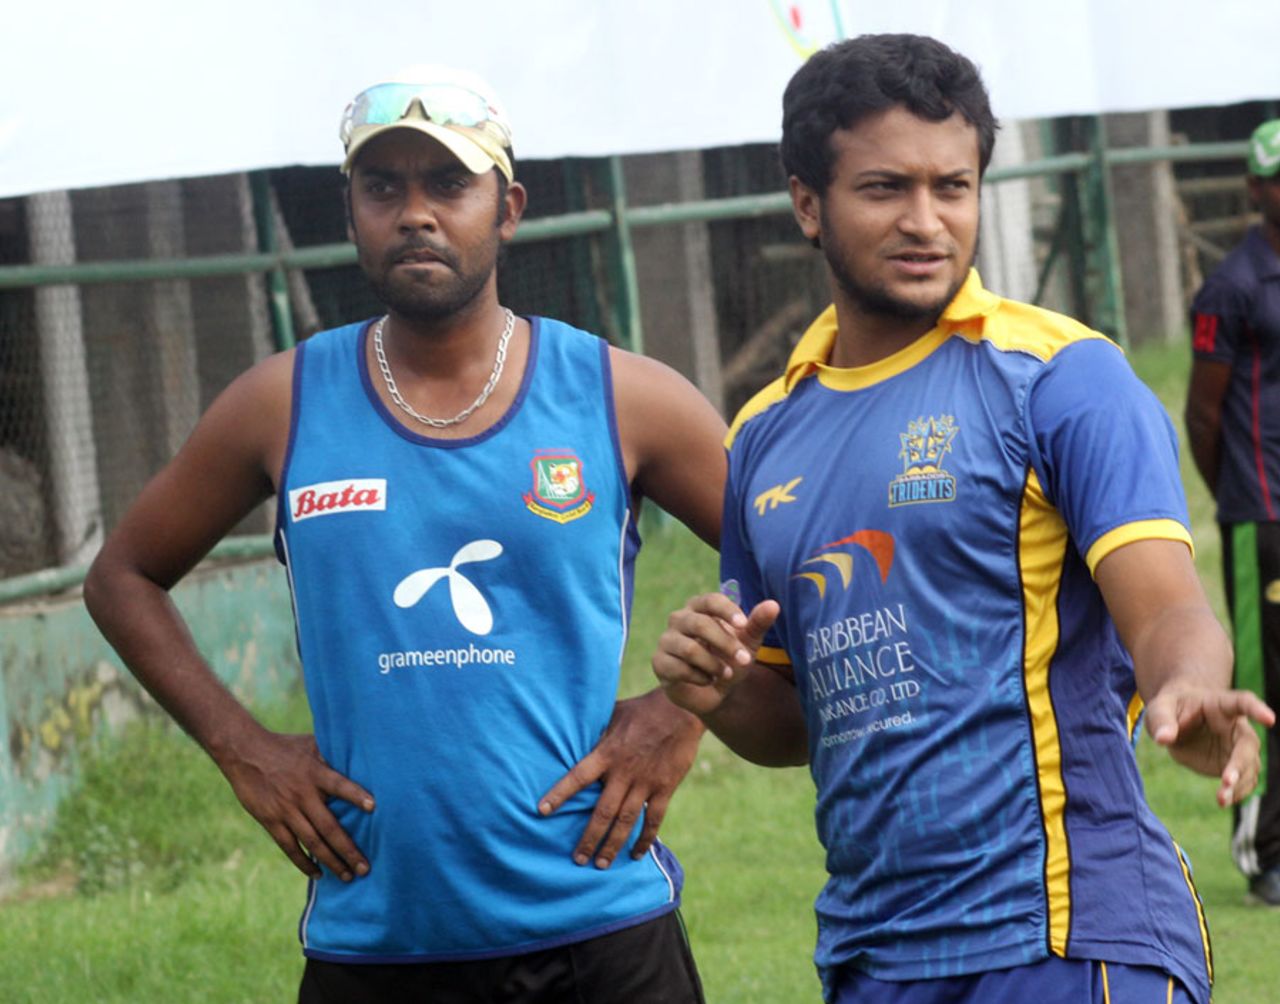 Shakib Al Hasan resumed training after recovering from a fractured thumb, Dhaka, September 29, 2013